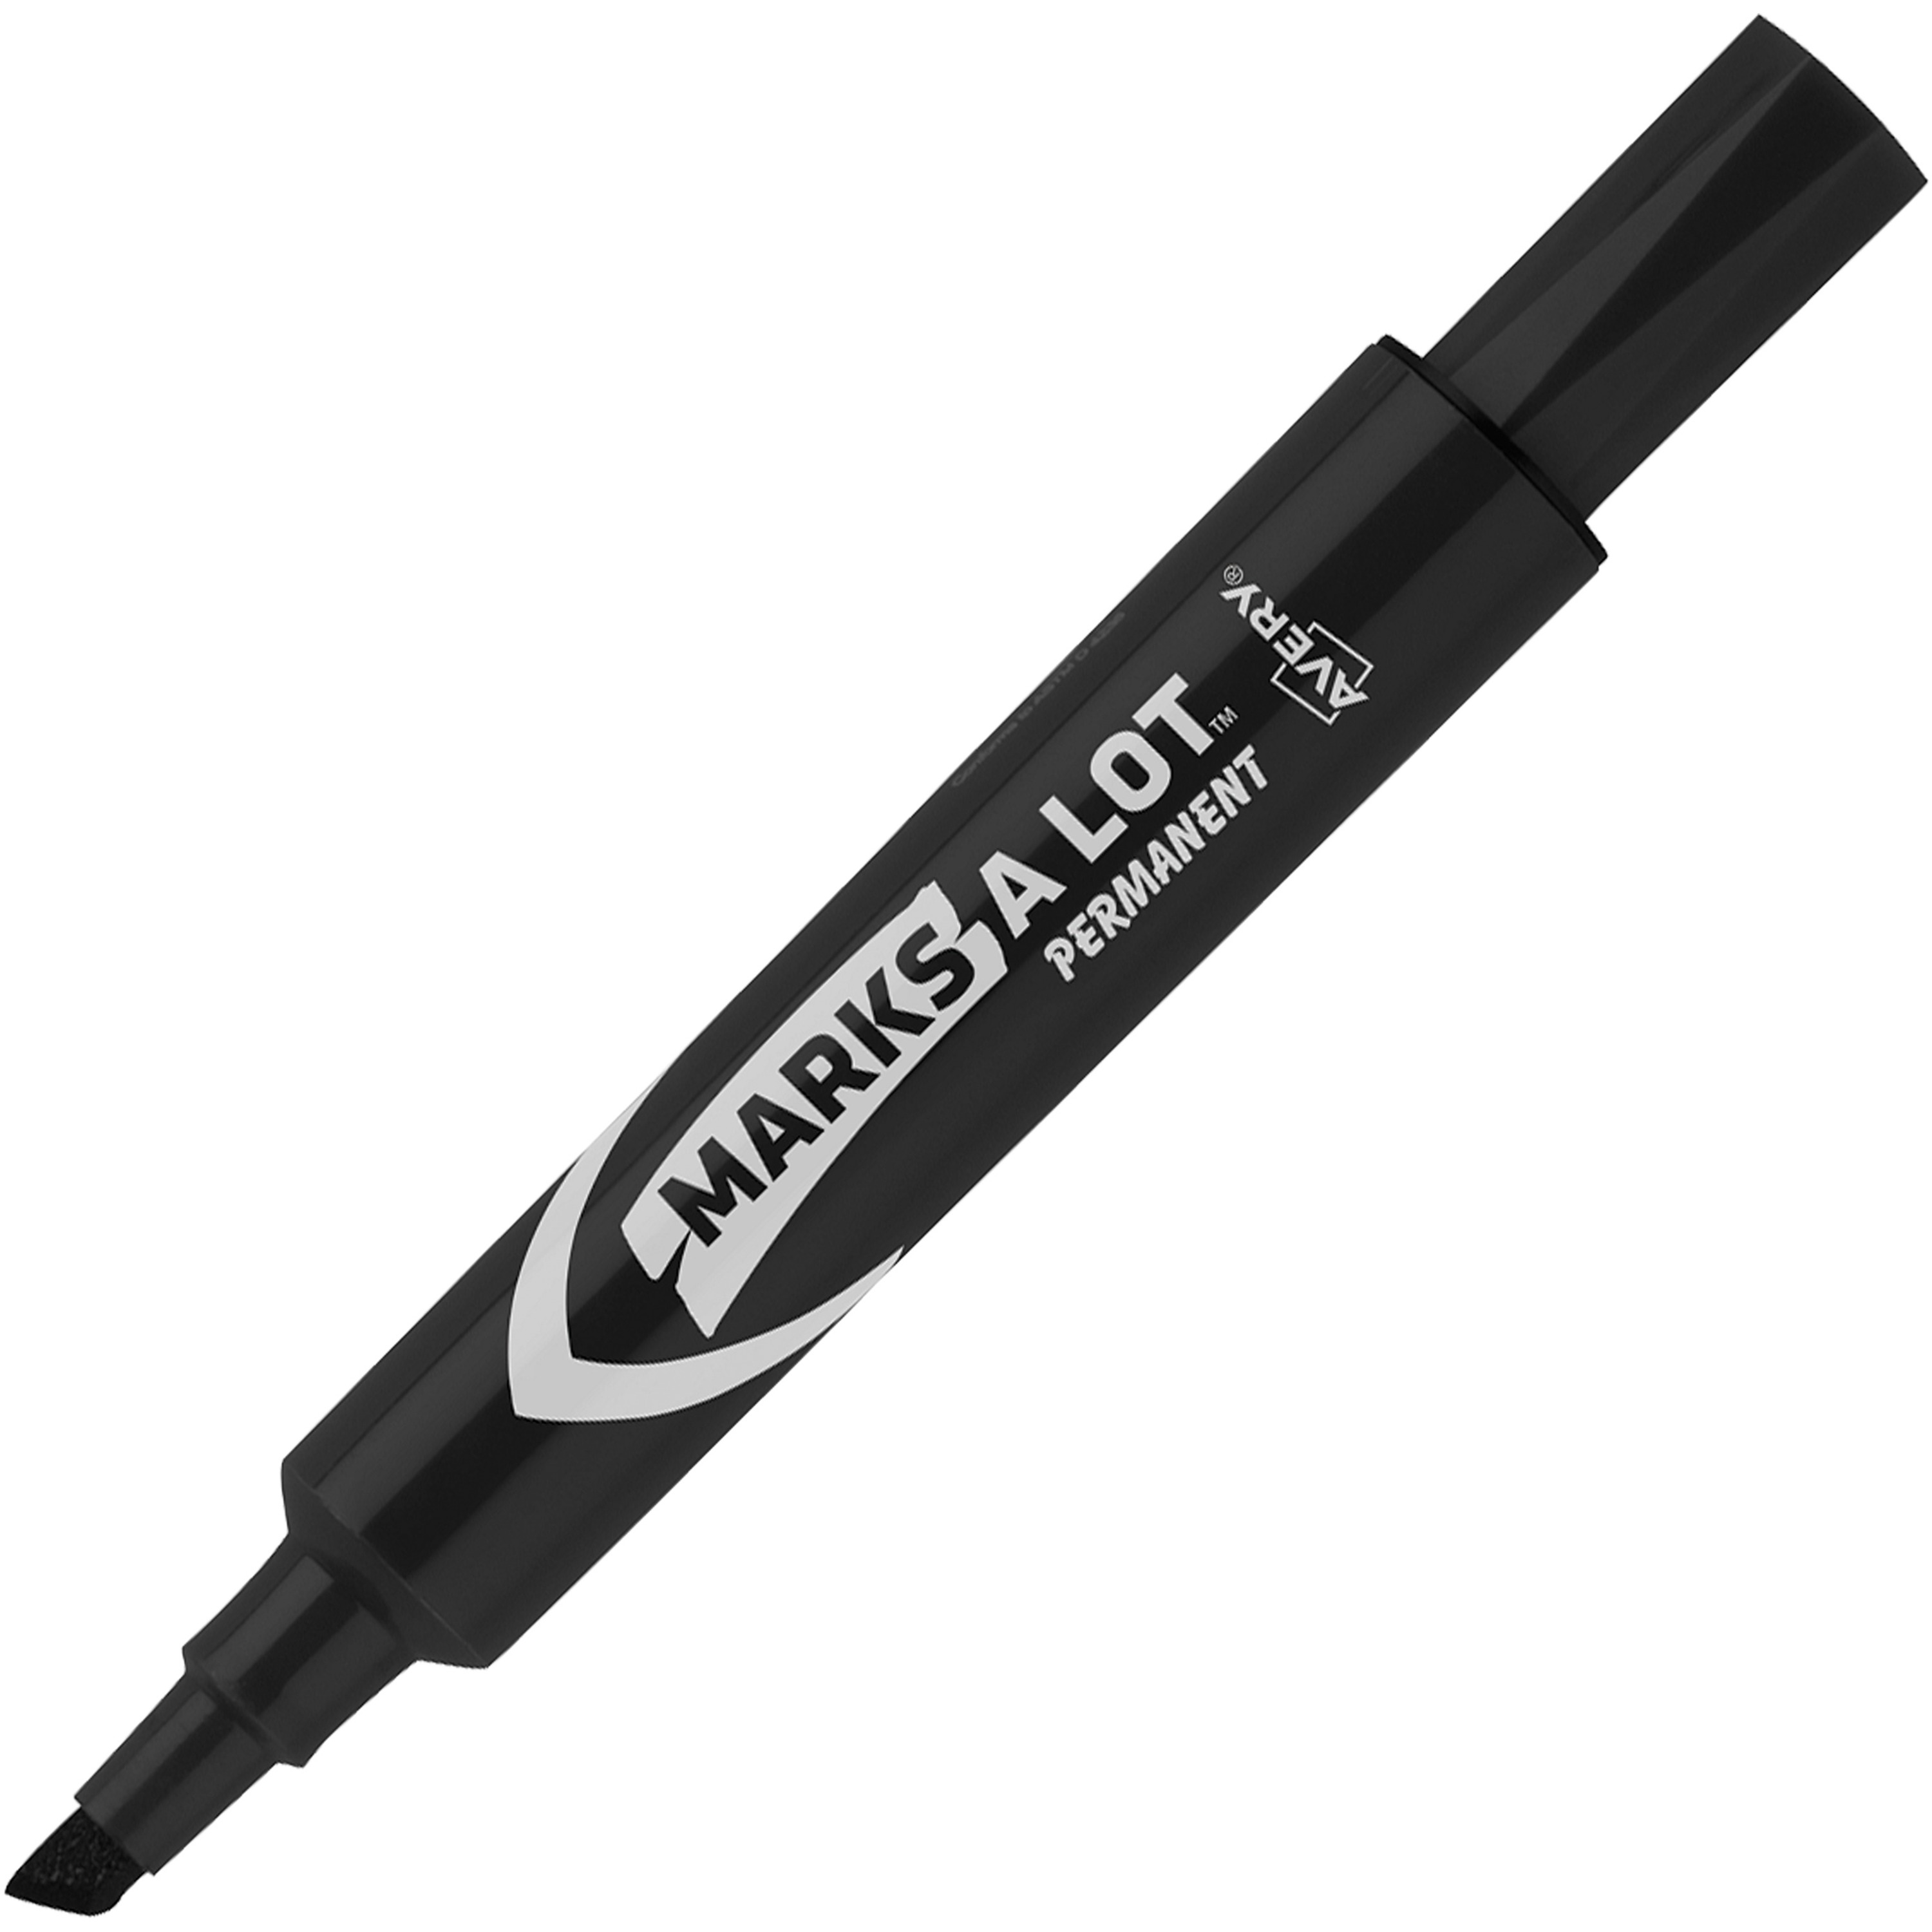 Label Black Plastic EASILY with Metallic Sharpies - Impossible to achieve  with normal sharpie. 